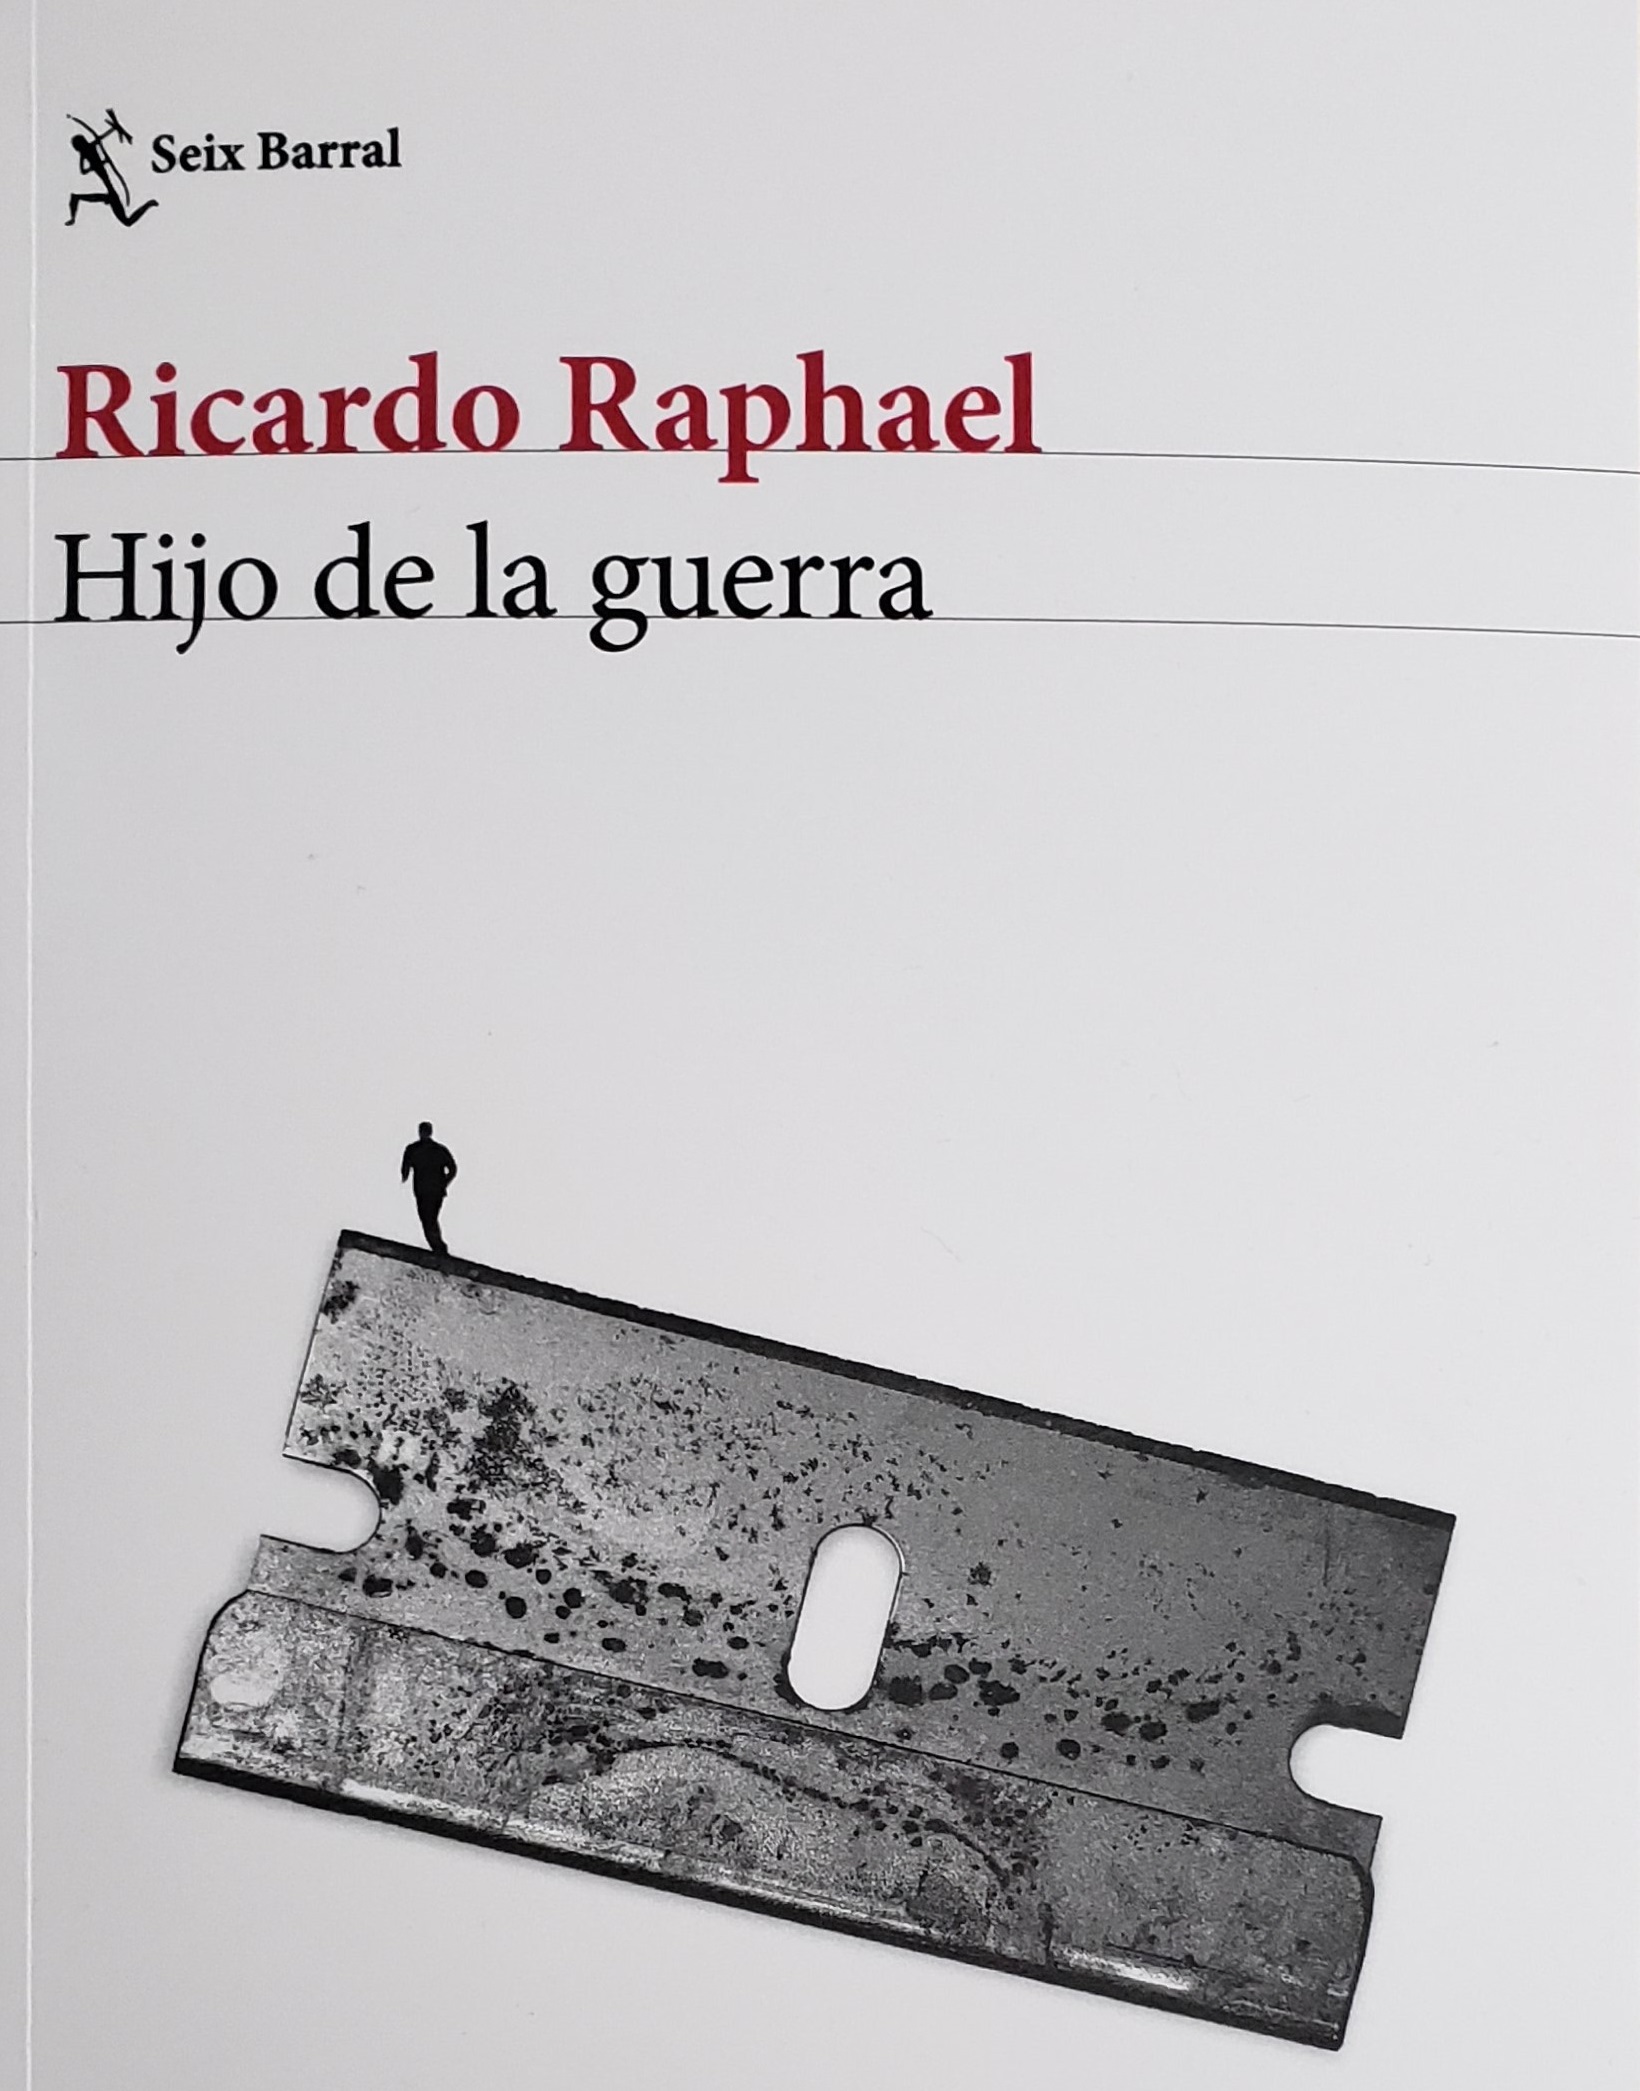 Ricardo Raphael was one of those affected (Photo: File)